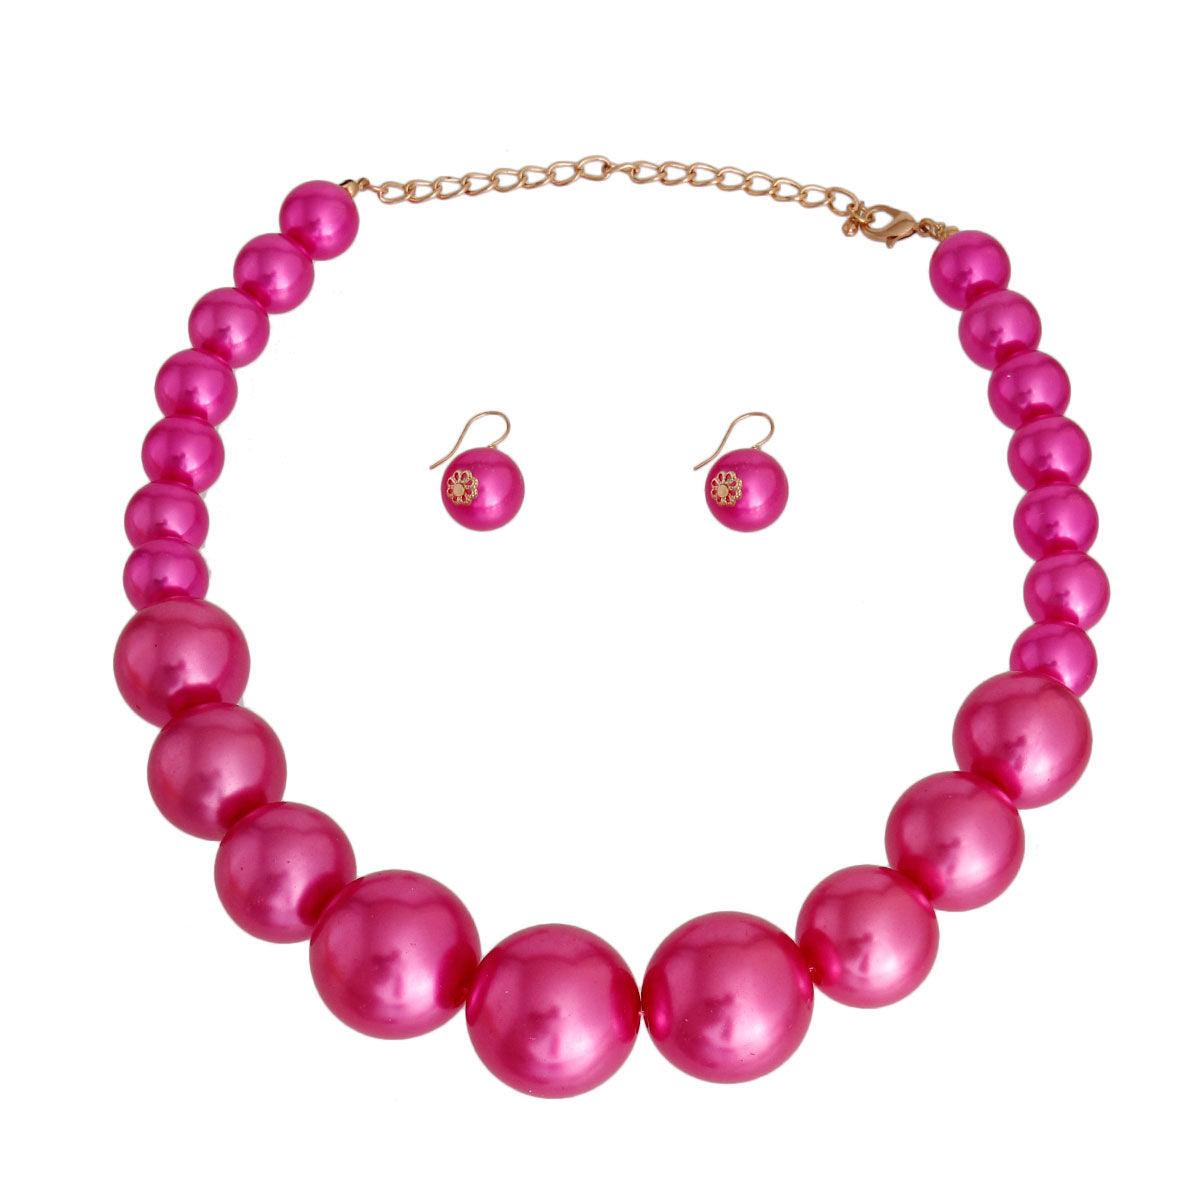 Pink Passion Necklace and Earrings Set Graduated Beads